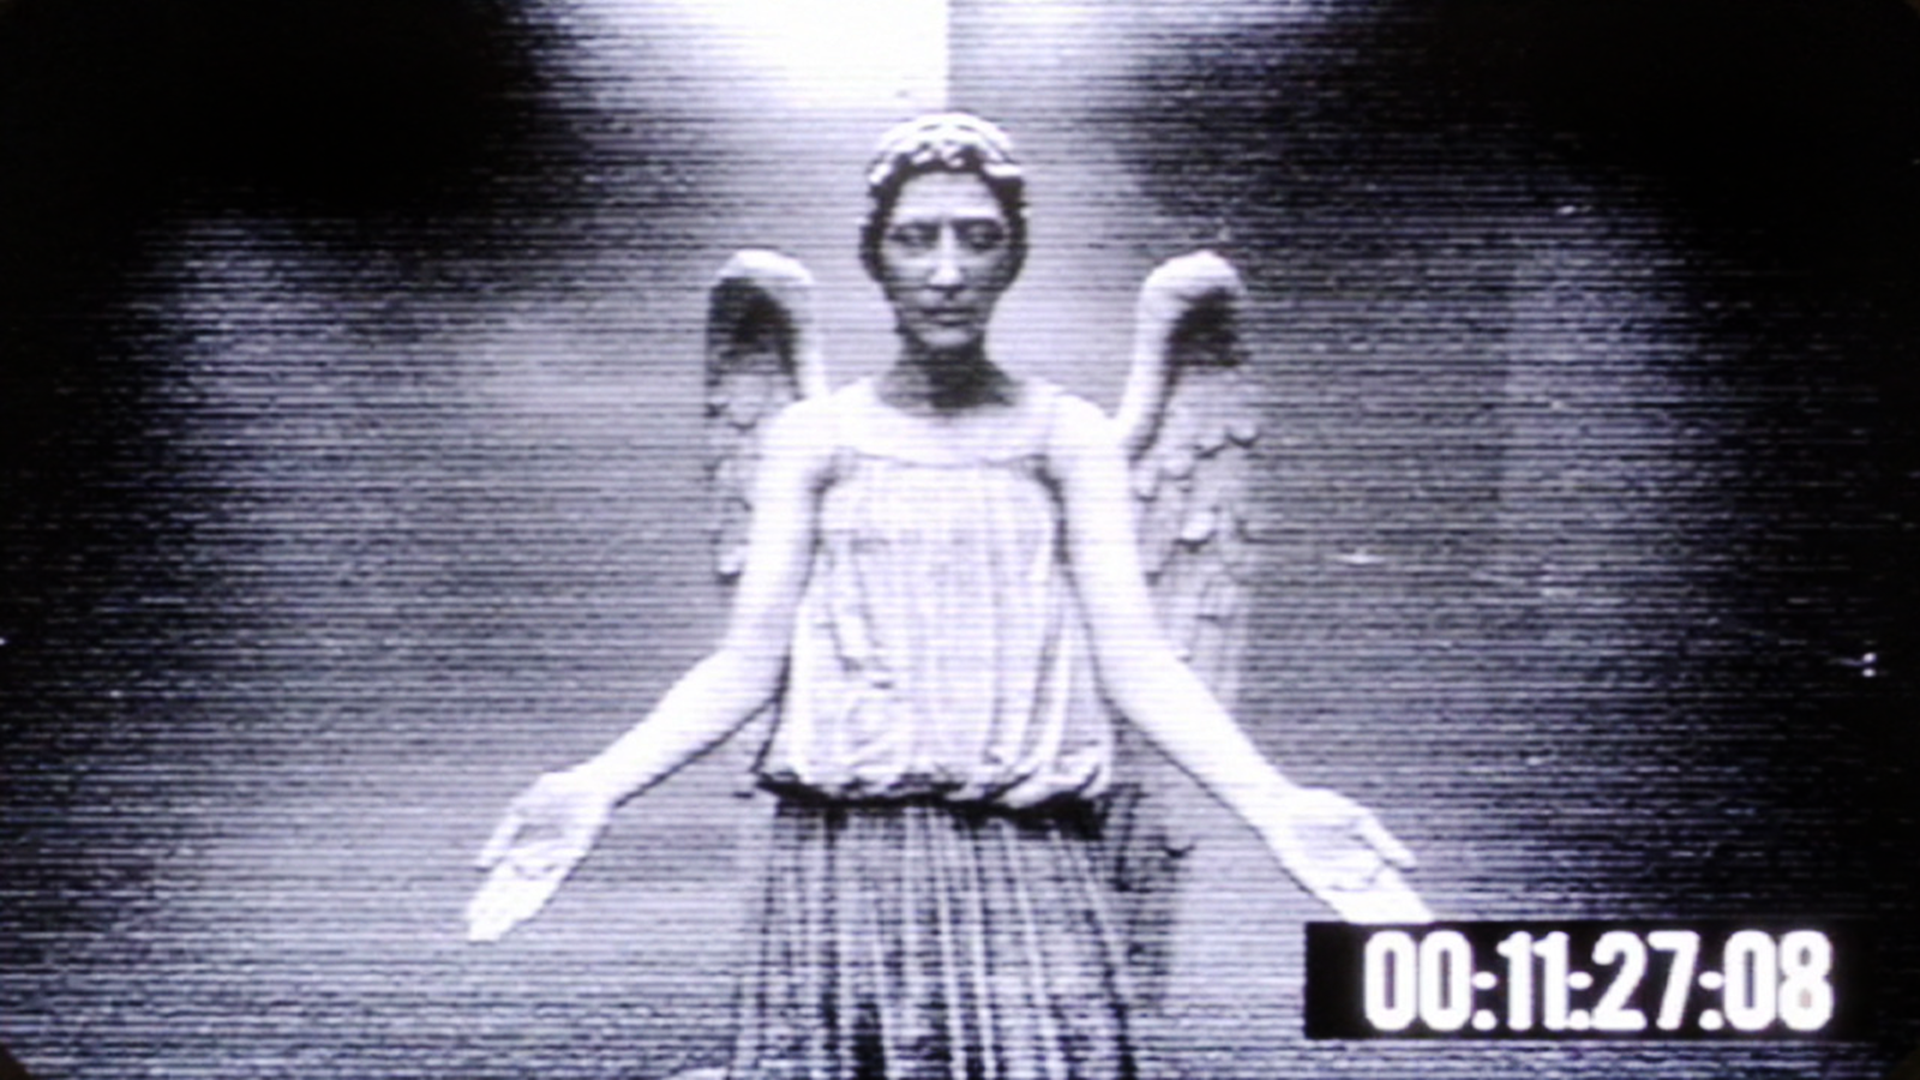 Weeping Angels Wallpaper Set It To Change Every Few Seconds For Some